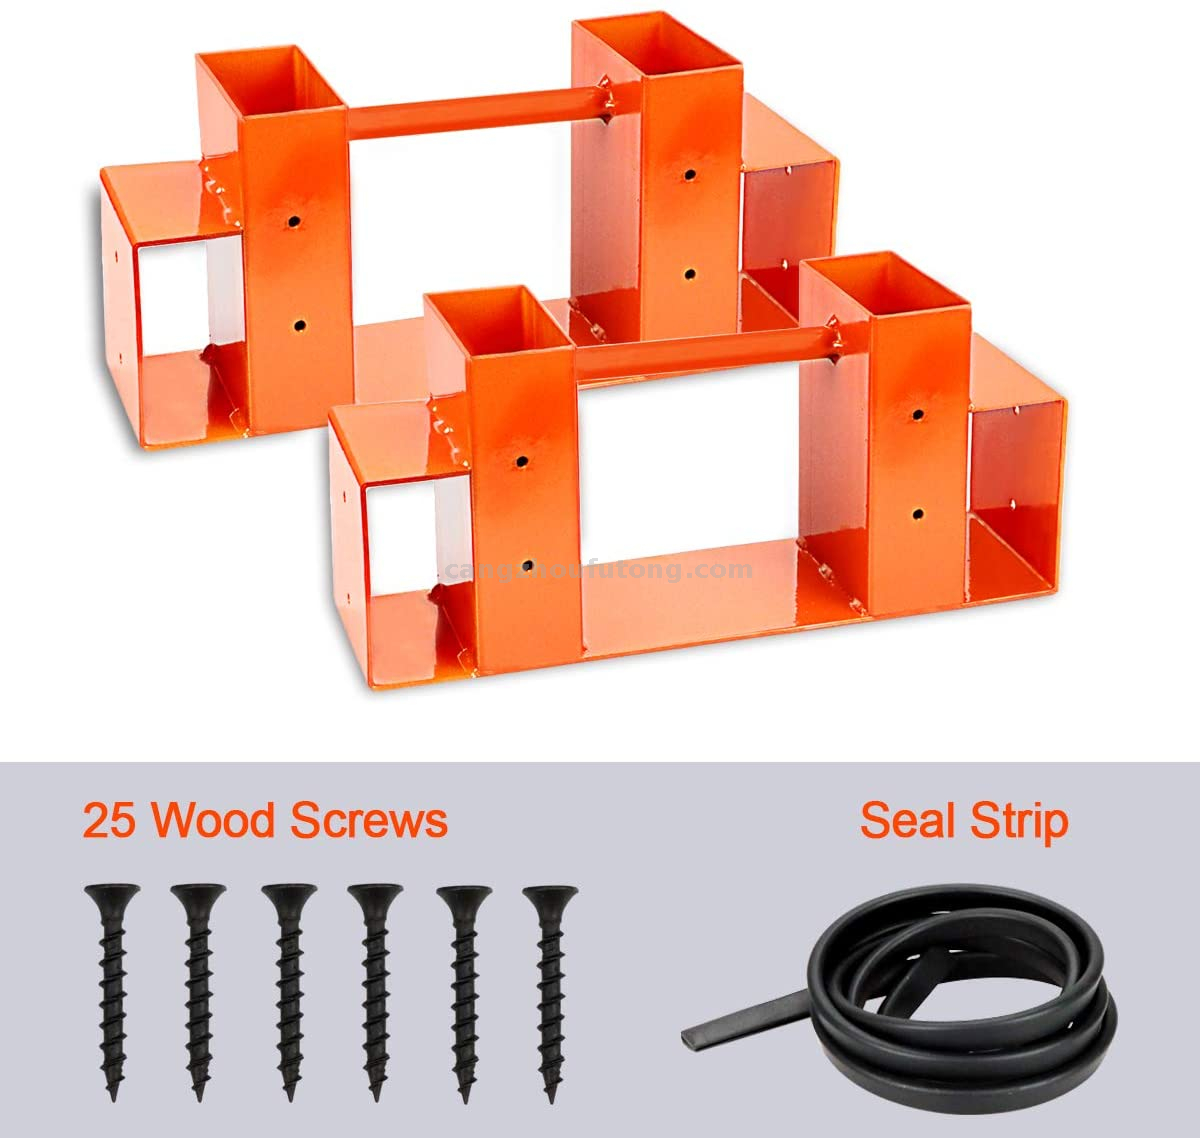 Firewood Log Storage Rack Bracket Kit with Screws, Fireplace Wood Storage Holder. Powder Coated Heavy Duty Steel And Adjustable To Any Length for Fitting Indoor/Outdoor, Orange